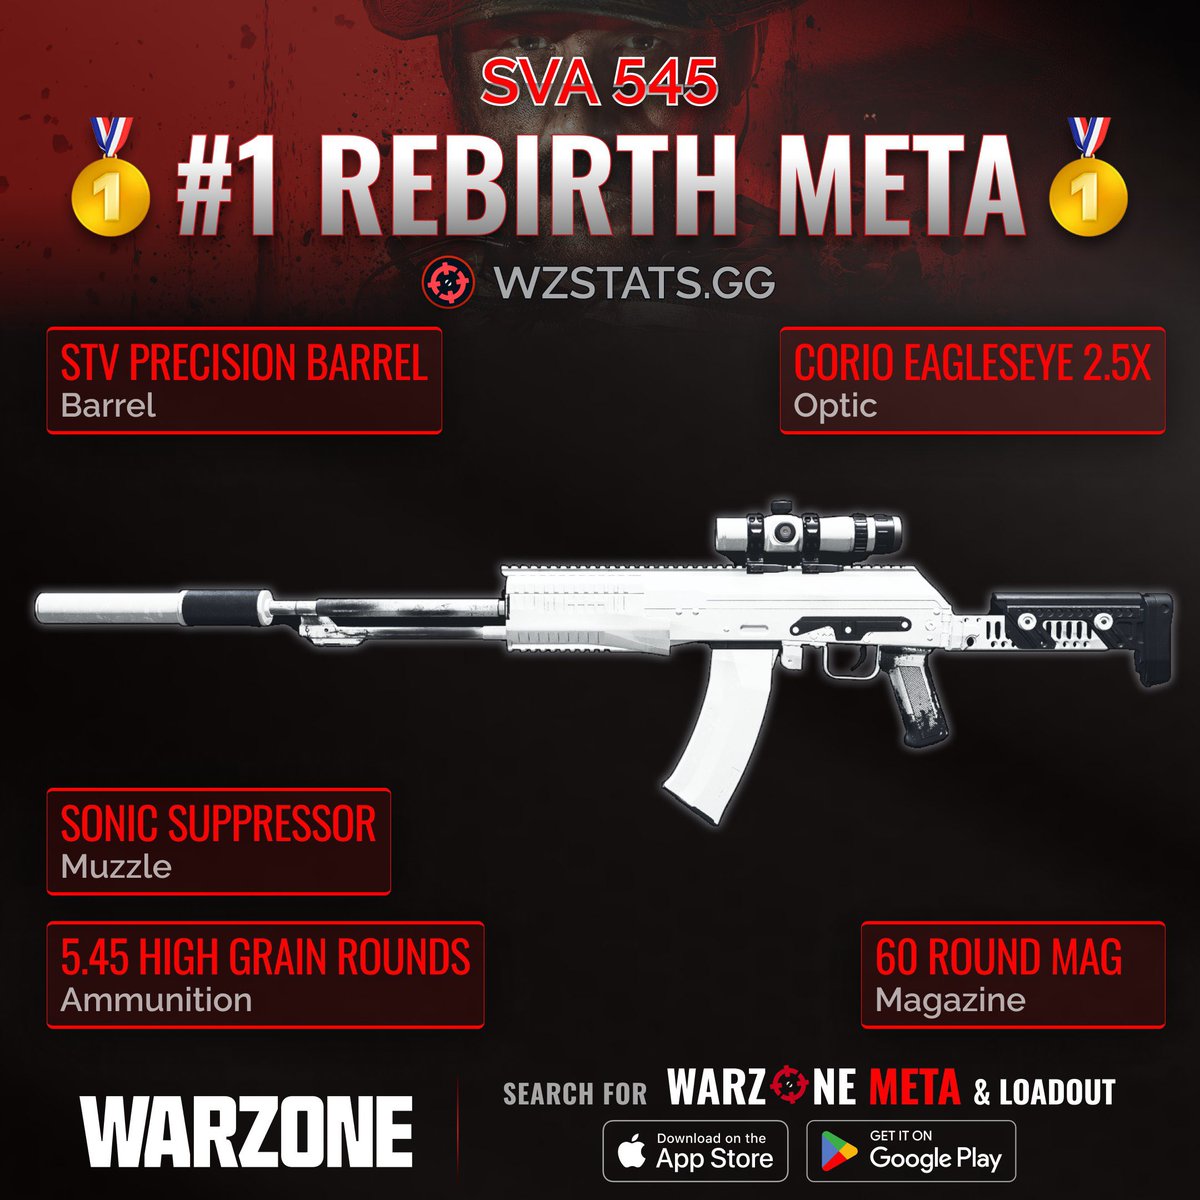 ‼️🚨 #1 REBIRTH ISLAND META 🚨‼️

🥇 The SVA 545 is the #1 Meta Primary in #Warzone Resurgence! 💯

✅ One of the Fastest TTKs upto 40m+
✅ High Damage Range
✅ High Bullet Velocity
✅ Great Mobility & Handling
✅ ZERO RECOIL in Burst Mode

Use this only in Burst Mode!